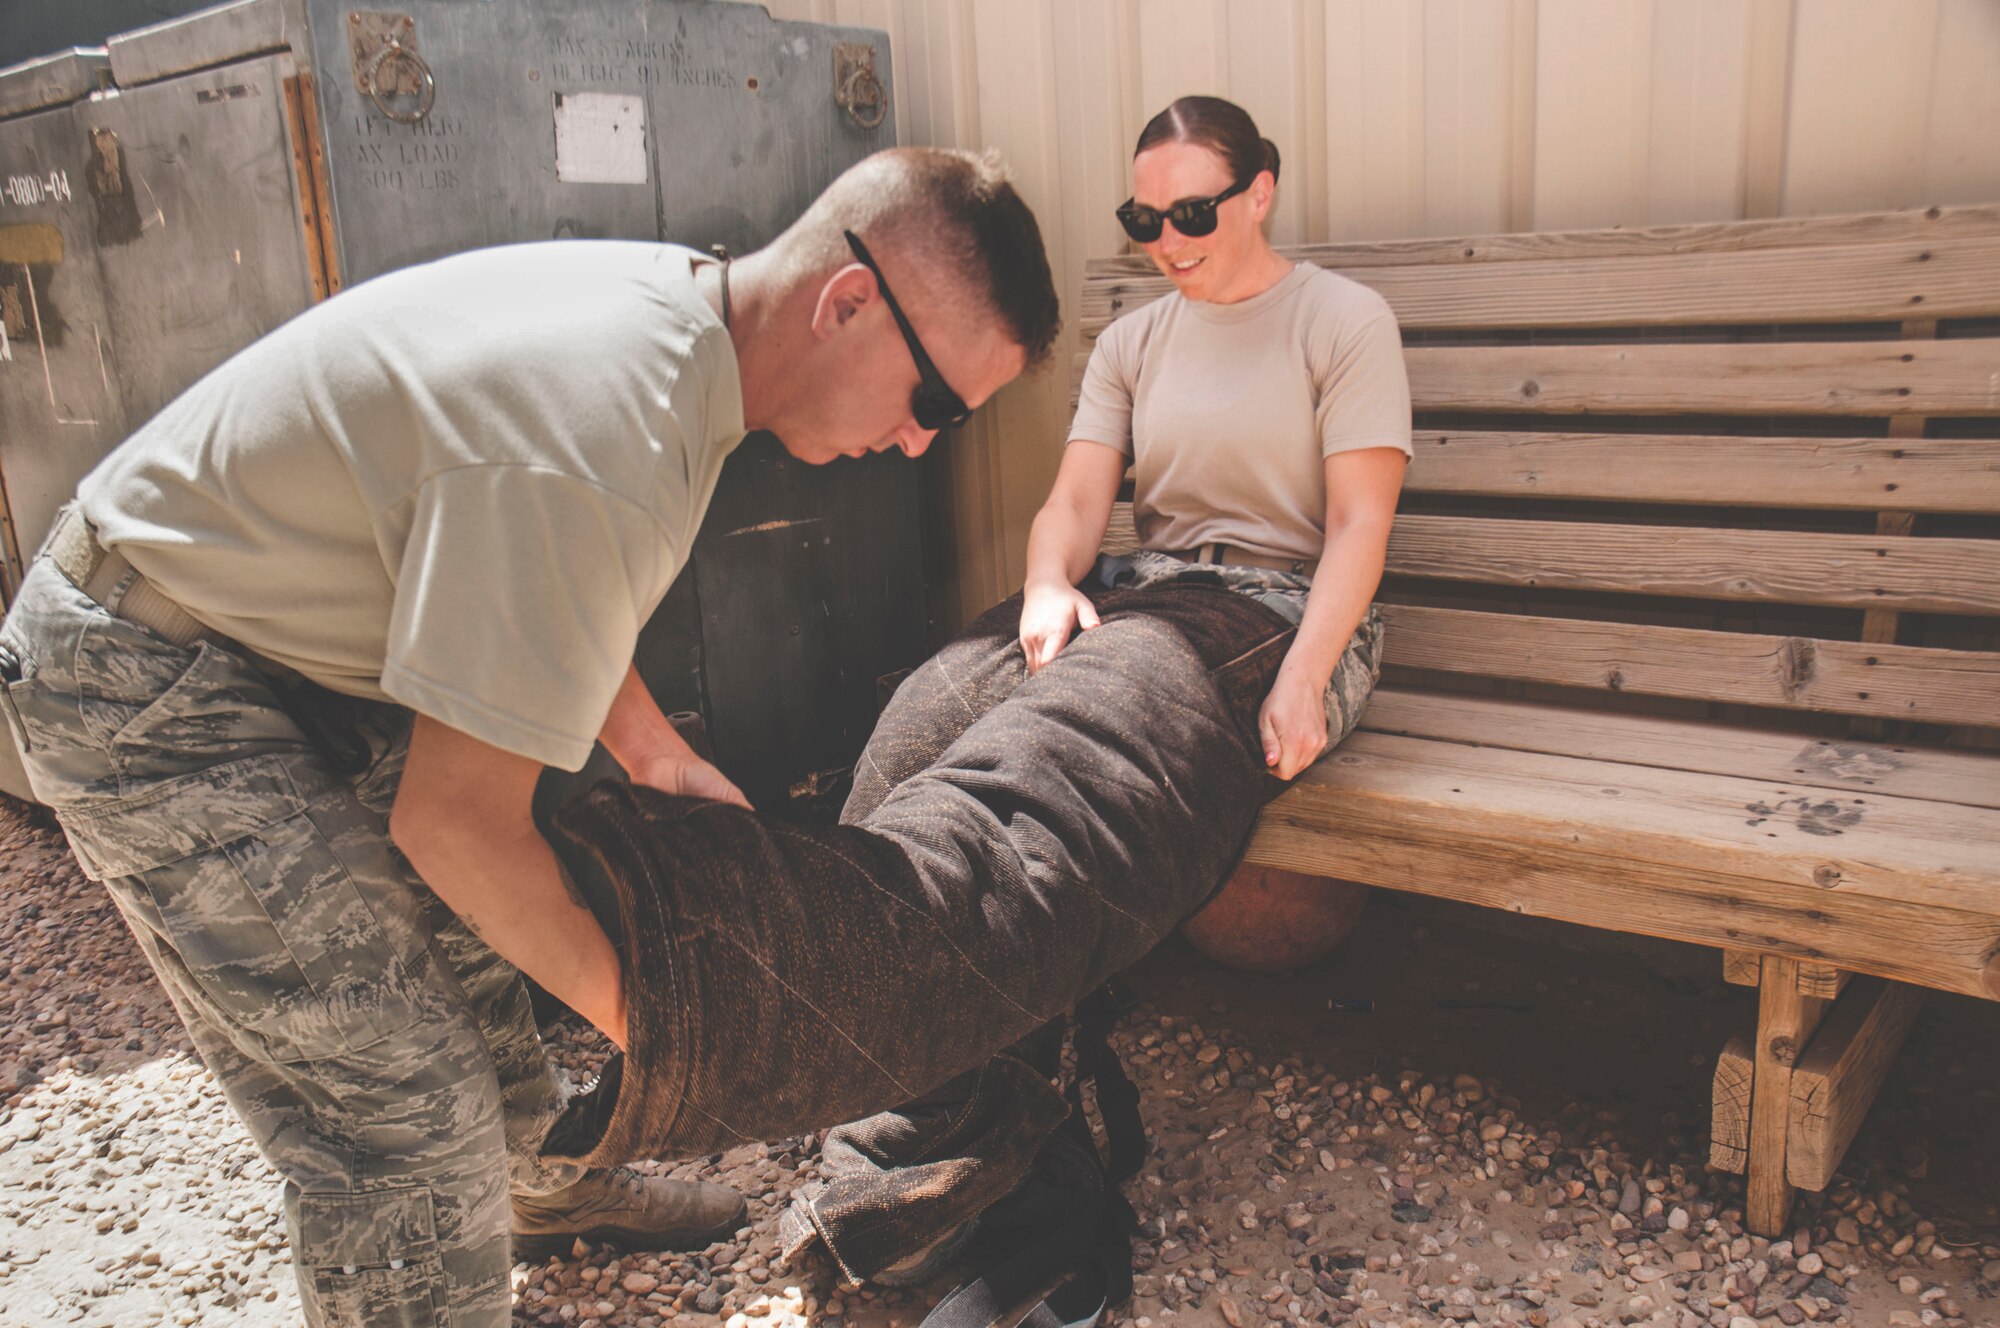 Tech. Sgt. Matthew Byrnes helps Staff Sgt. Jessica Moore into a bite suit during a mental health unit familiarization visit at an undisclosed location in southwest Asia, June 13, 2017. Moore frequently visits units that are likely to respond to trauma incidents. (U.S. Air Force Photo/Master Sgt. Eric M. Sharman)